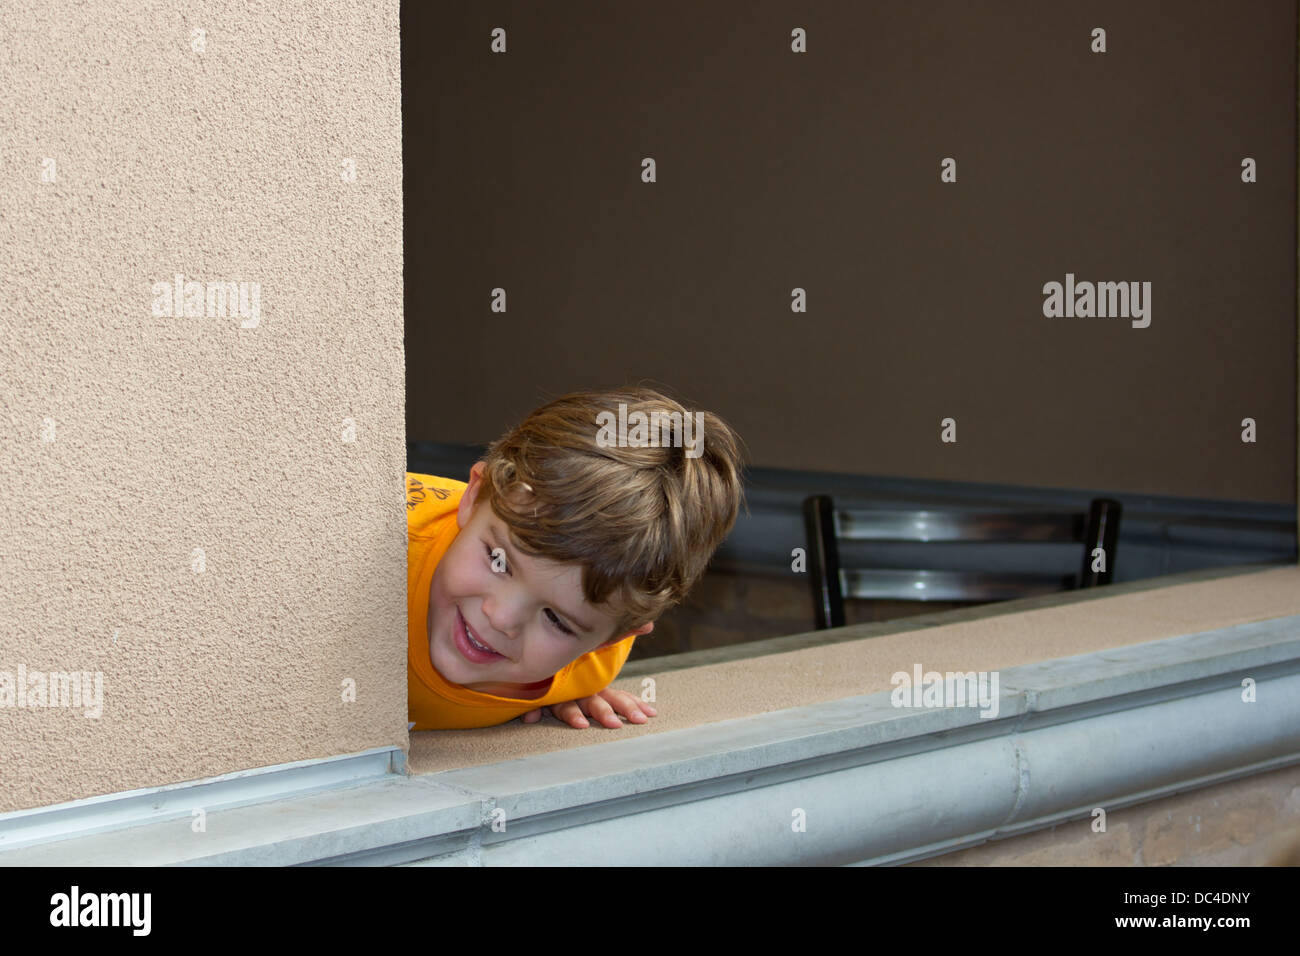 A young boy with a cute smile leaning out a window. Stock Photo